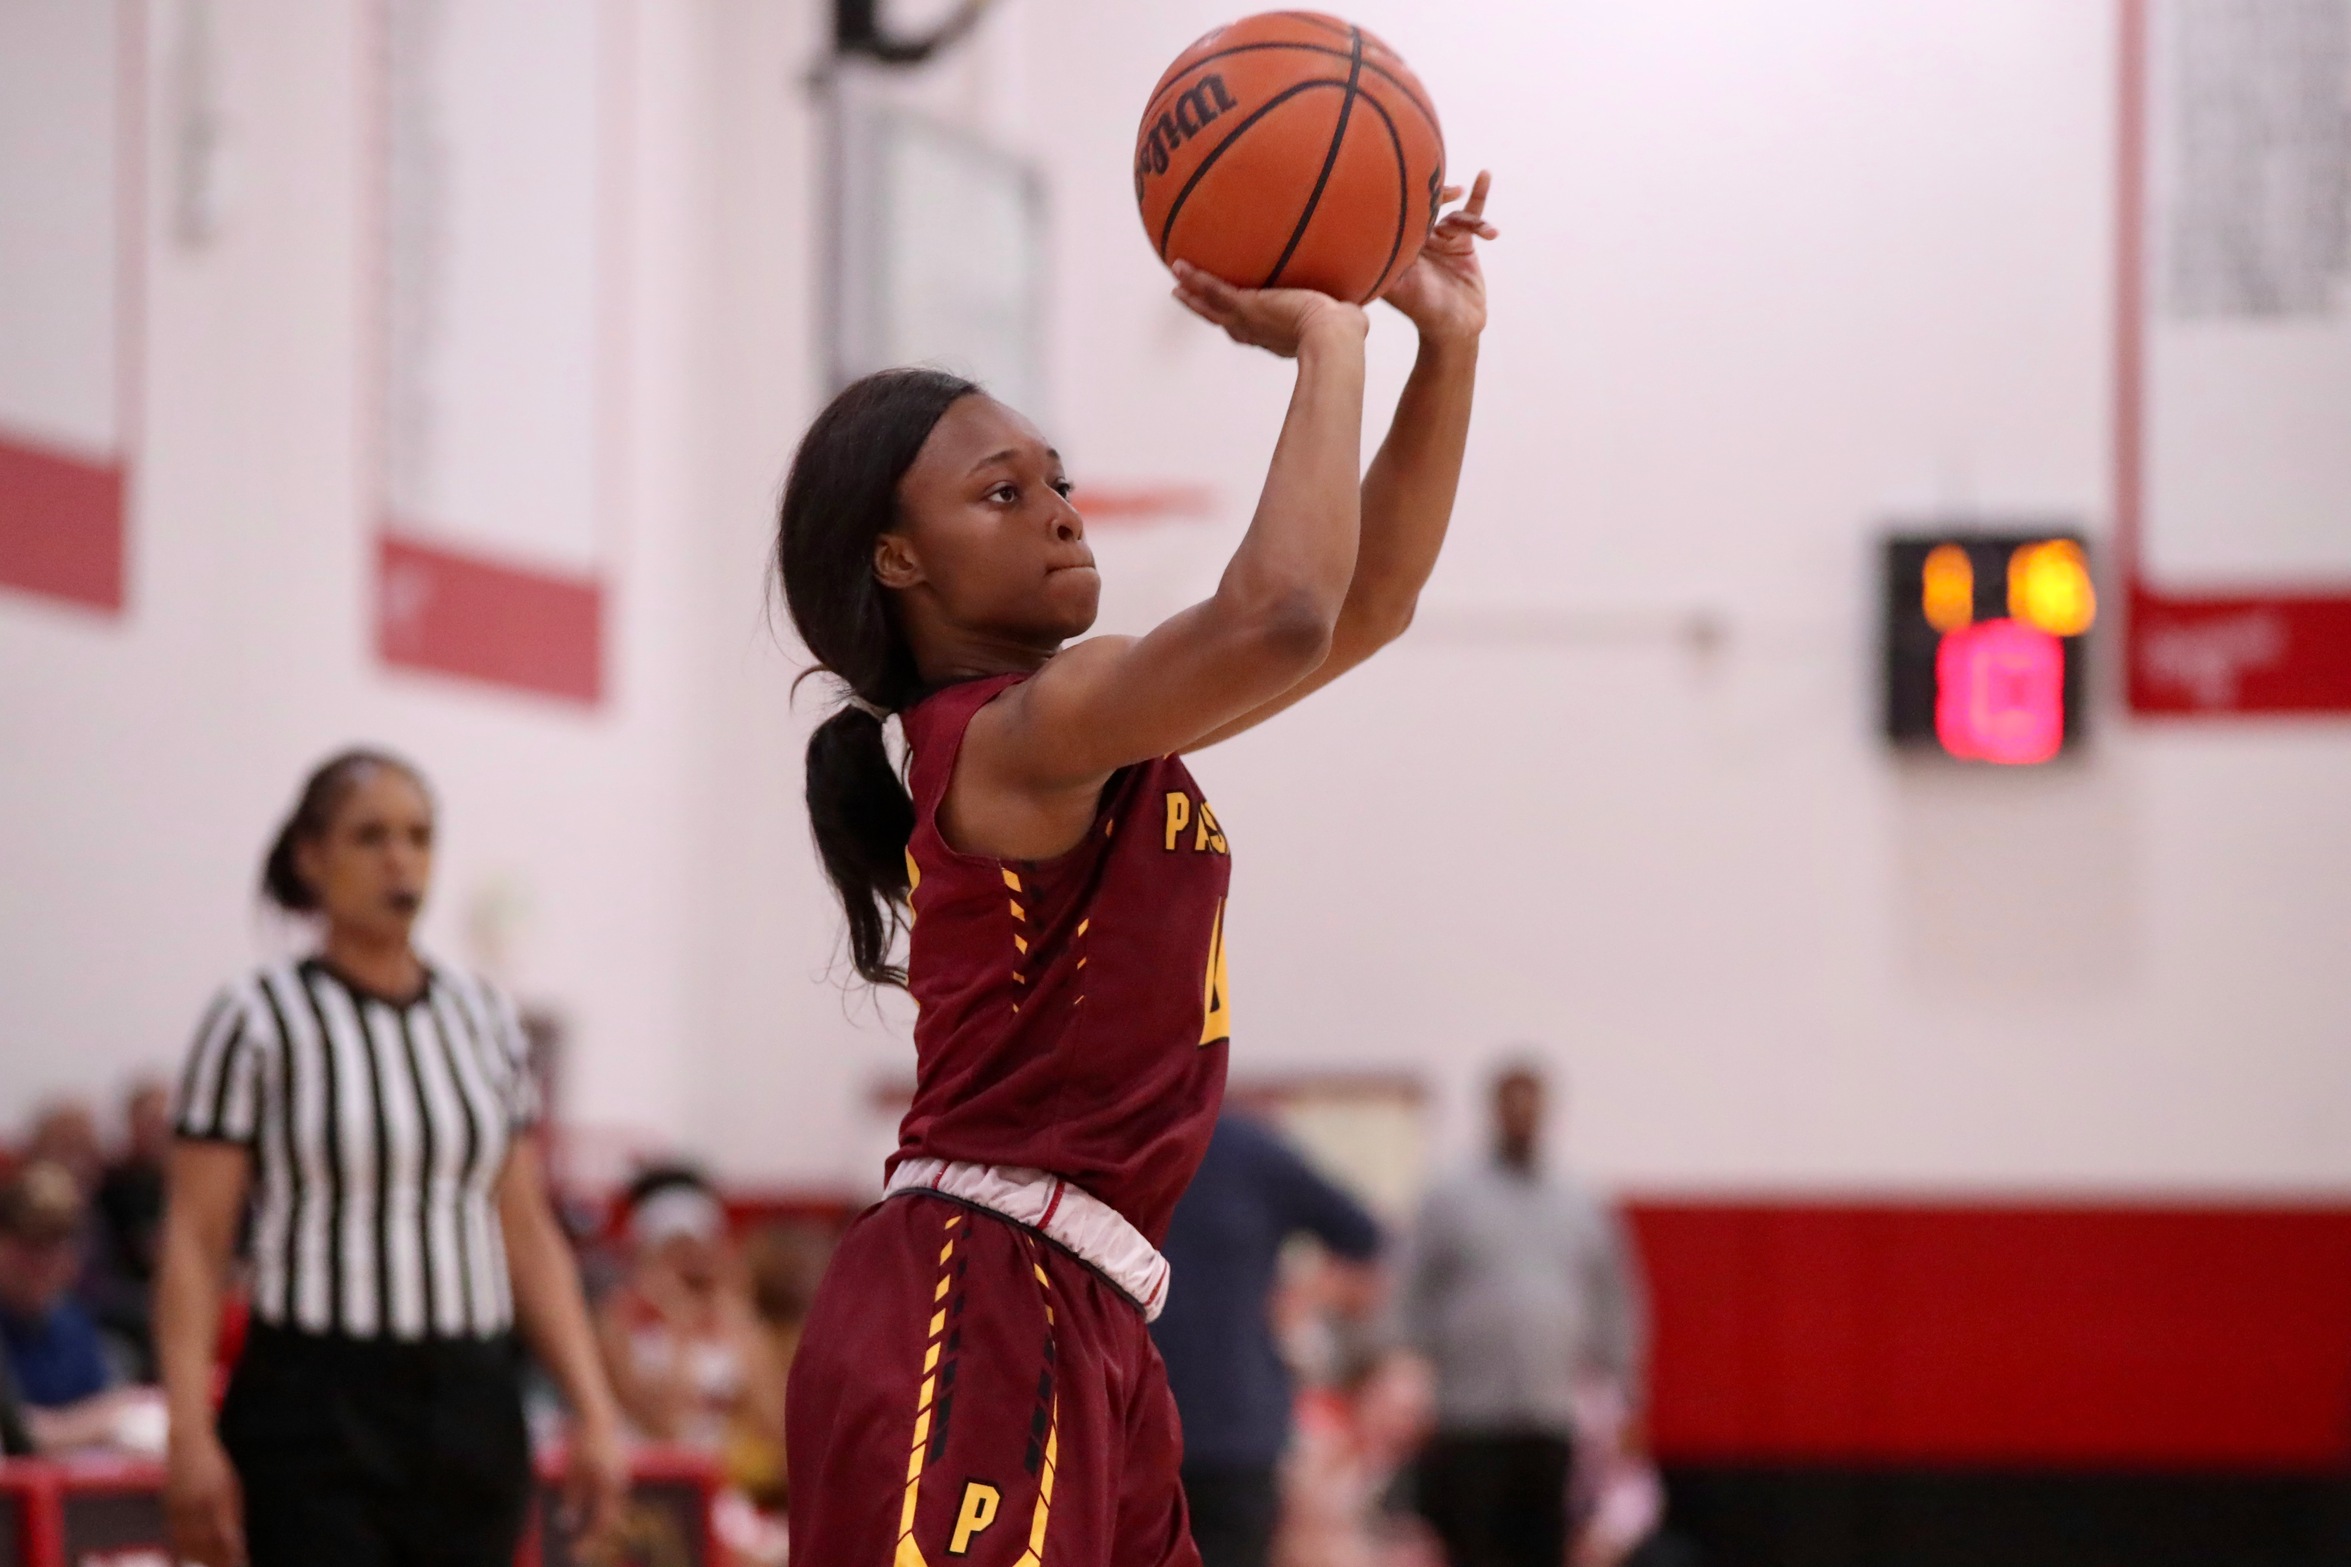 Kaniya Hill is the only player returning from the pre-pandemic 2019-20 squad as the PCC women's basketball team starts the 2021-22 season.